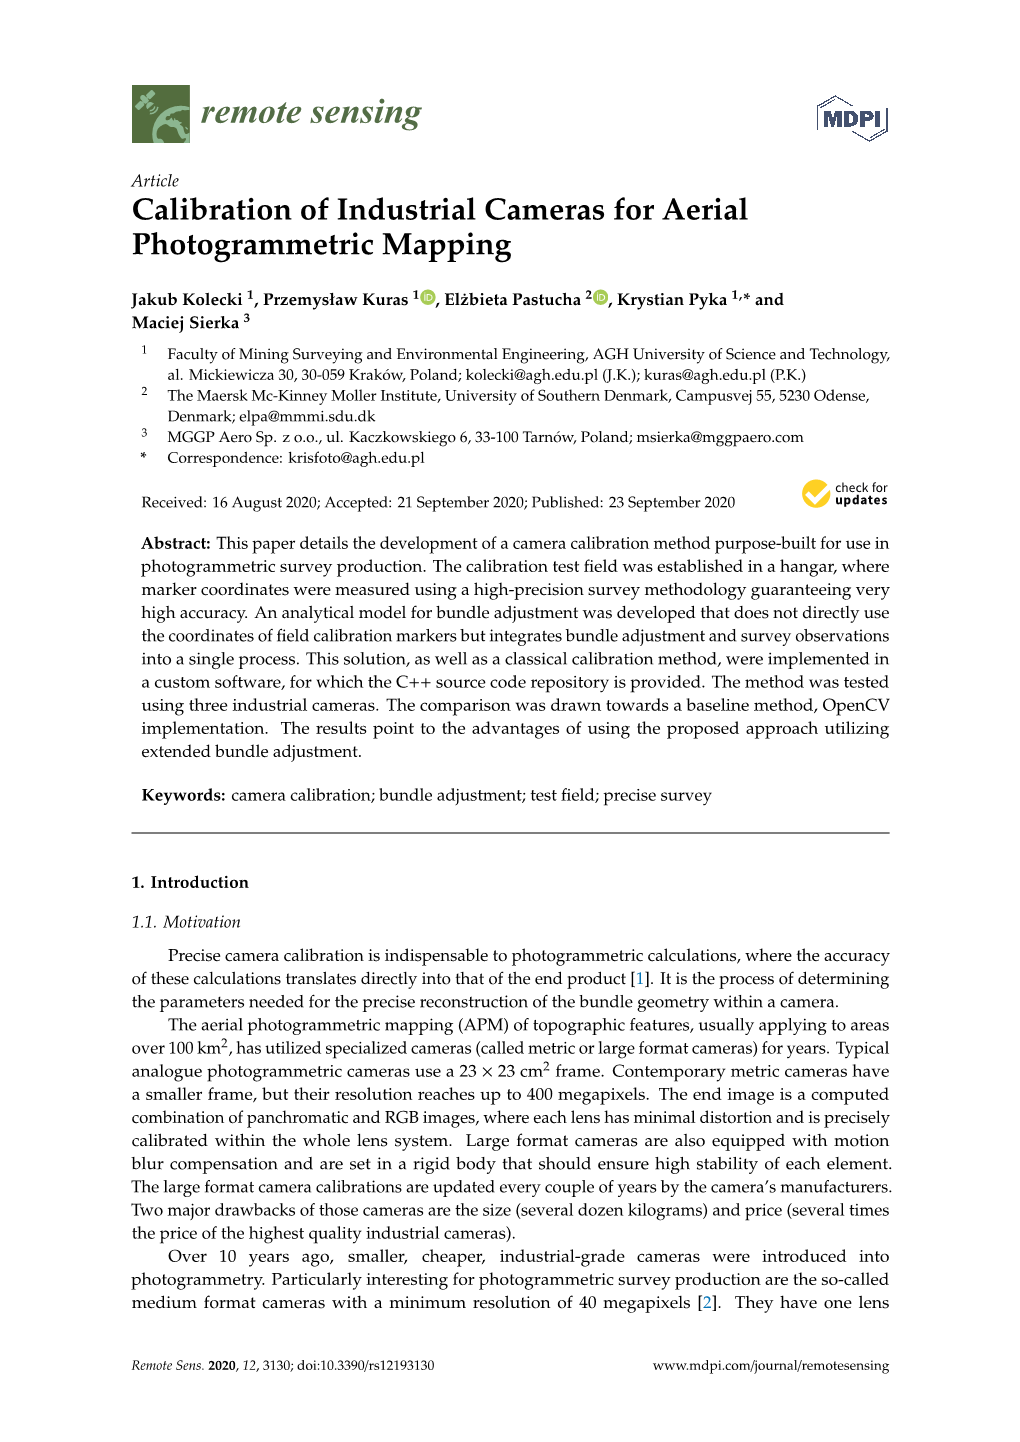 Calibration of Industrial Cameras for Aerial Photogrammetric Mapping